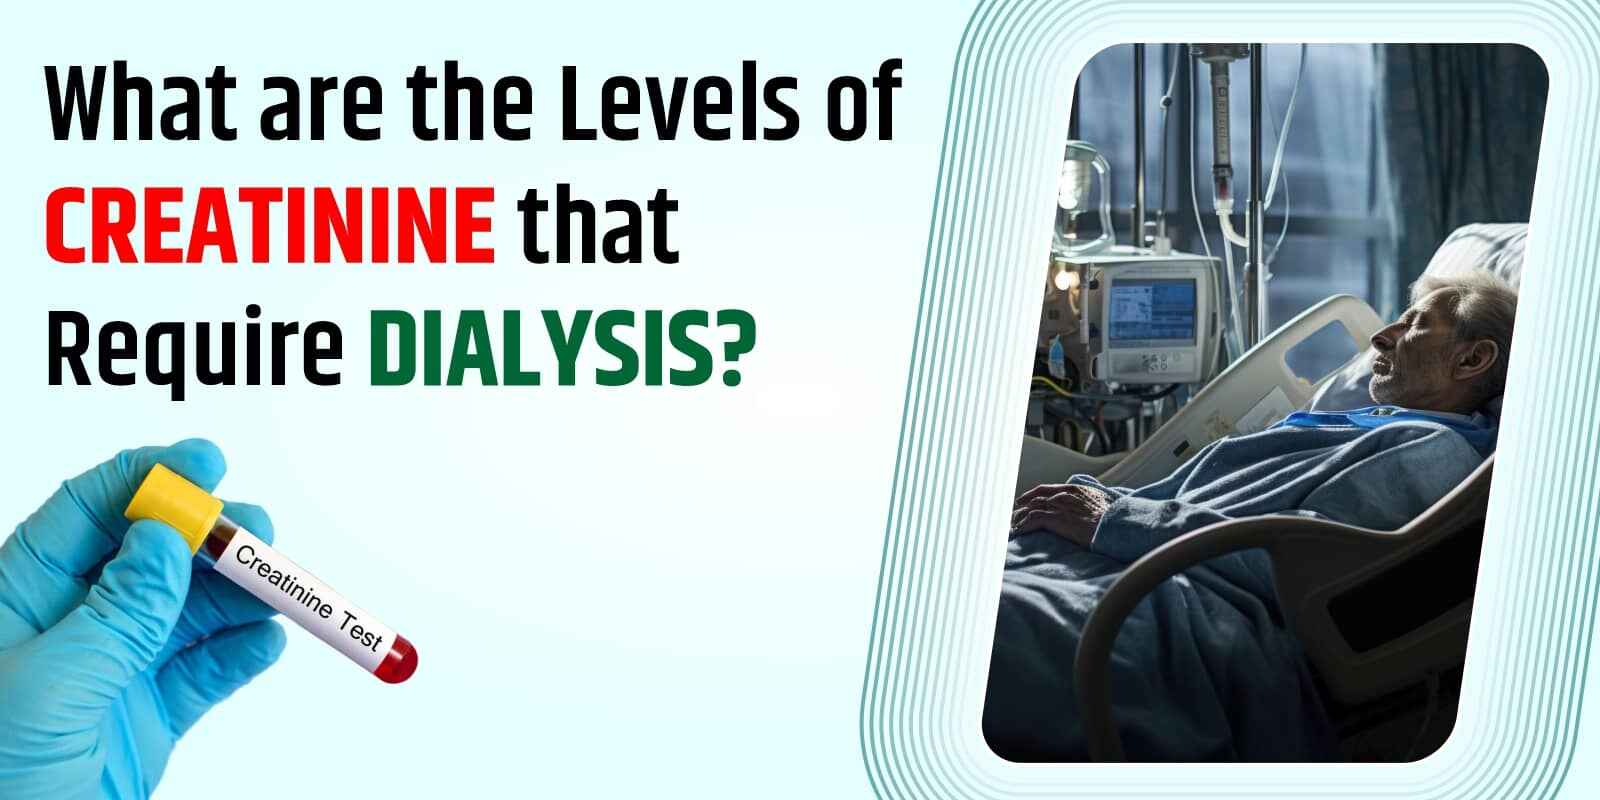 What are the Levels of Creatinine that Require Dialysis?